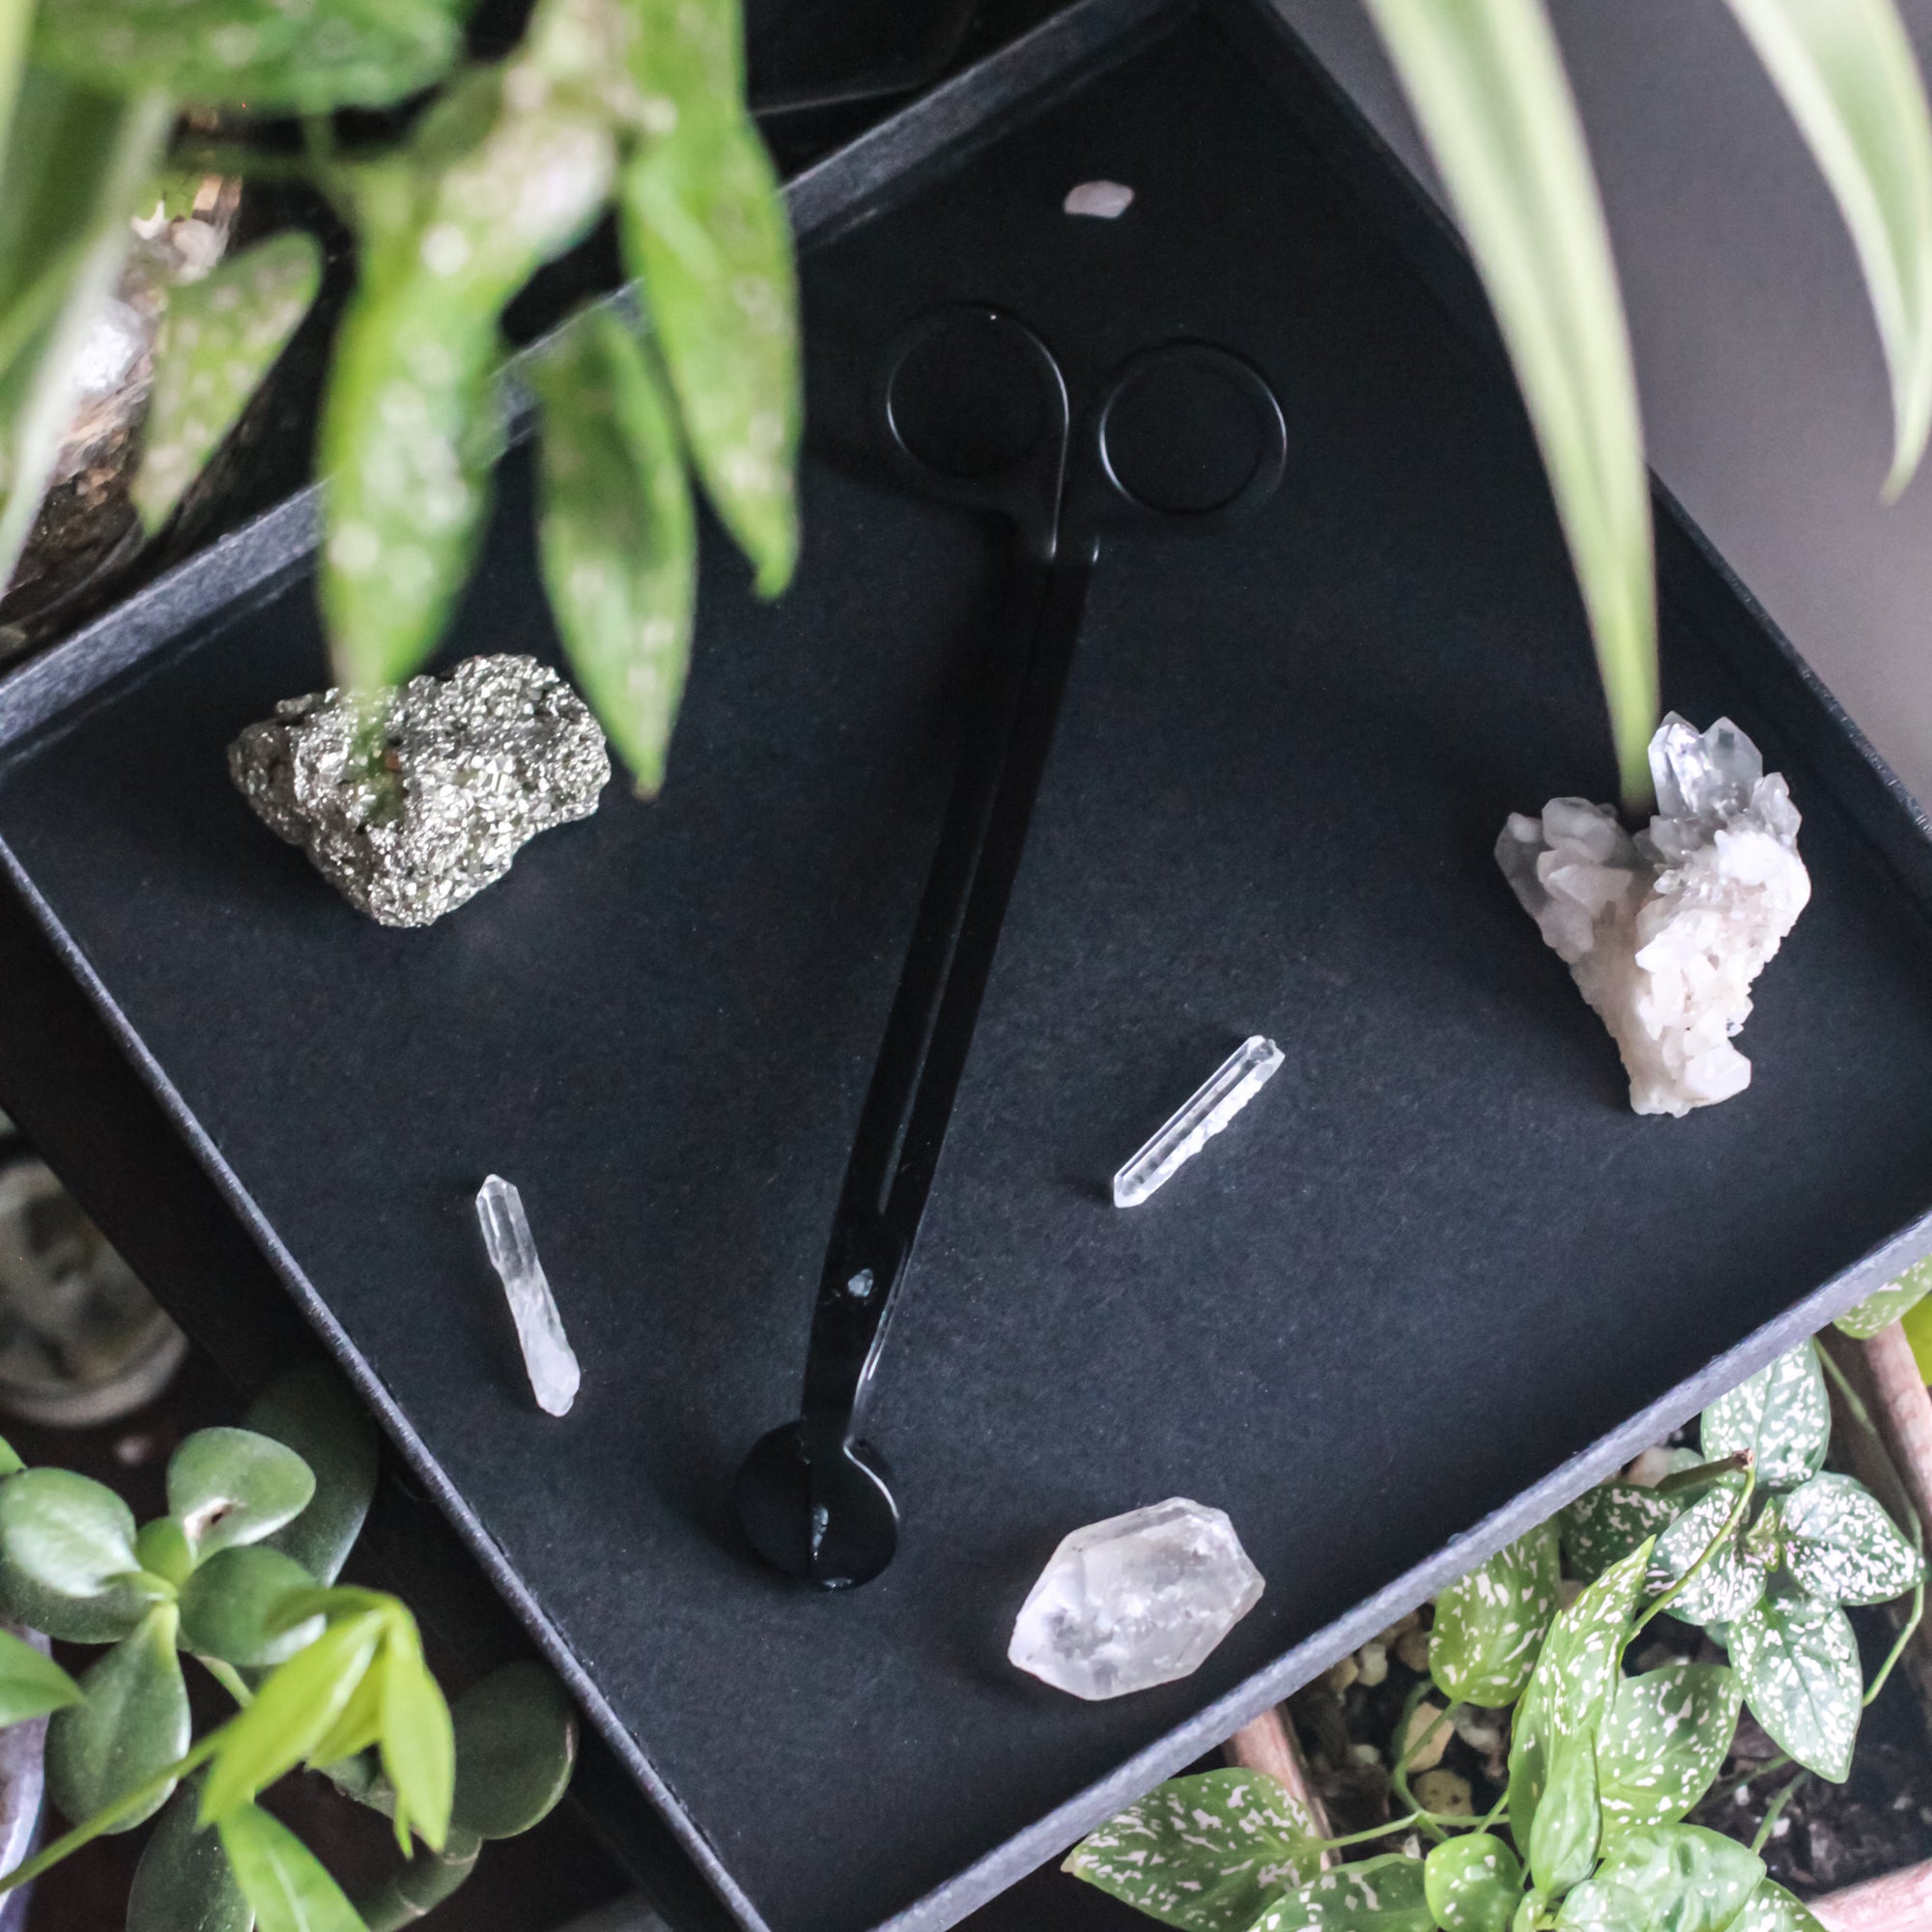 A black matte wick trimmer is viewed from above. It rests on a dark navy blue square tray with a few crystals resting on it as well. In the corners of the photo, green house plants peak into frame.